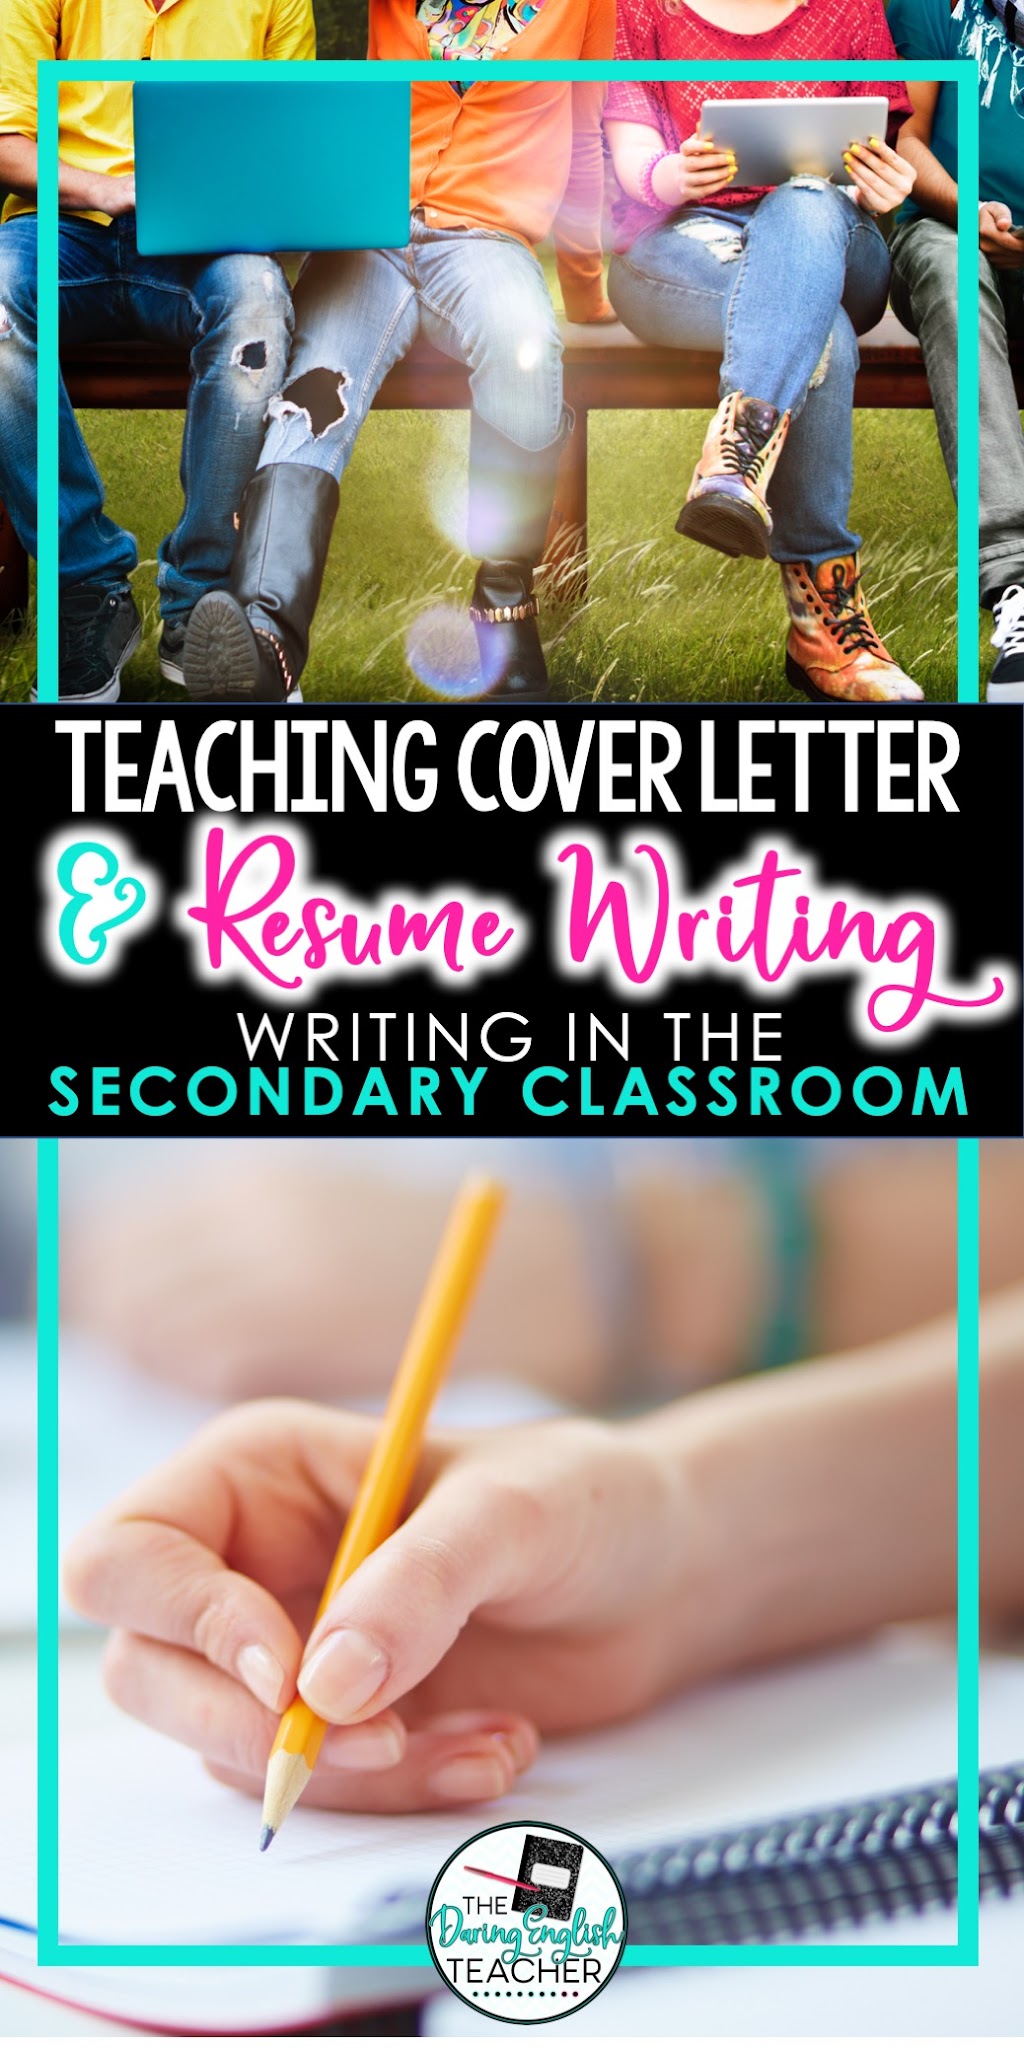 Teaching Students Cover Letter and Resume Writing